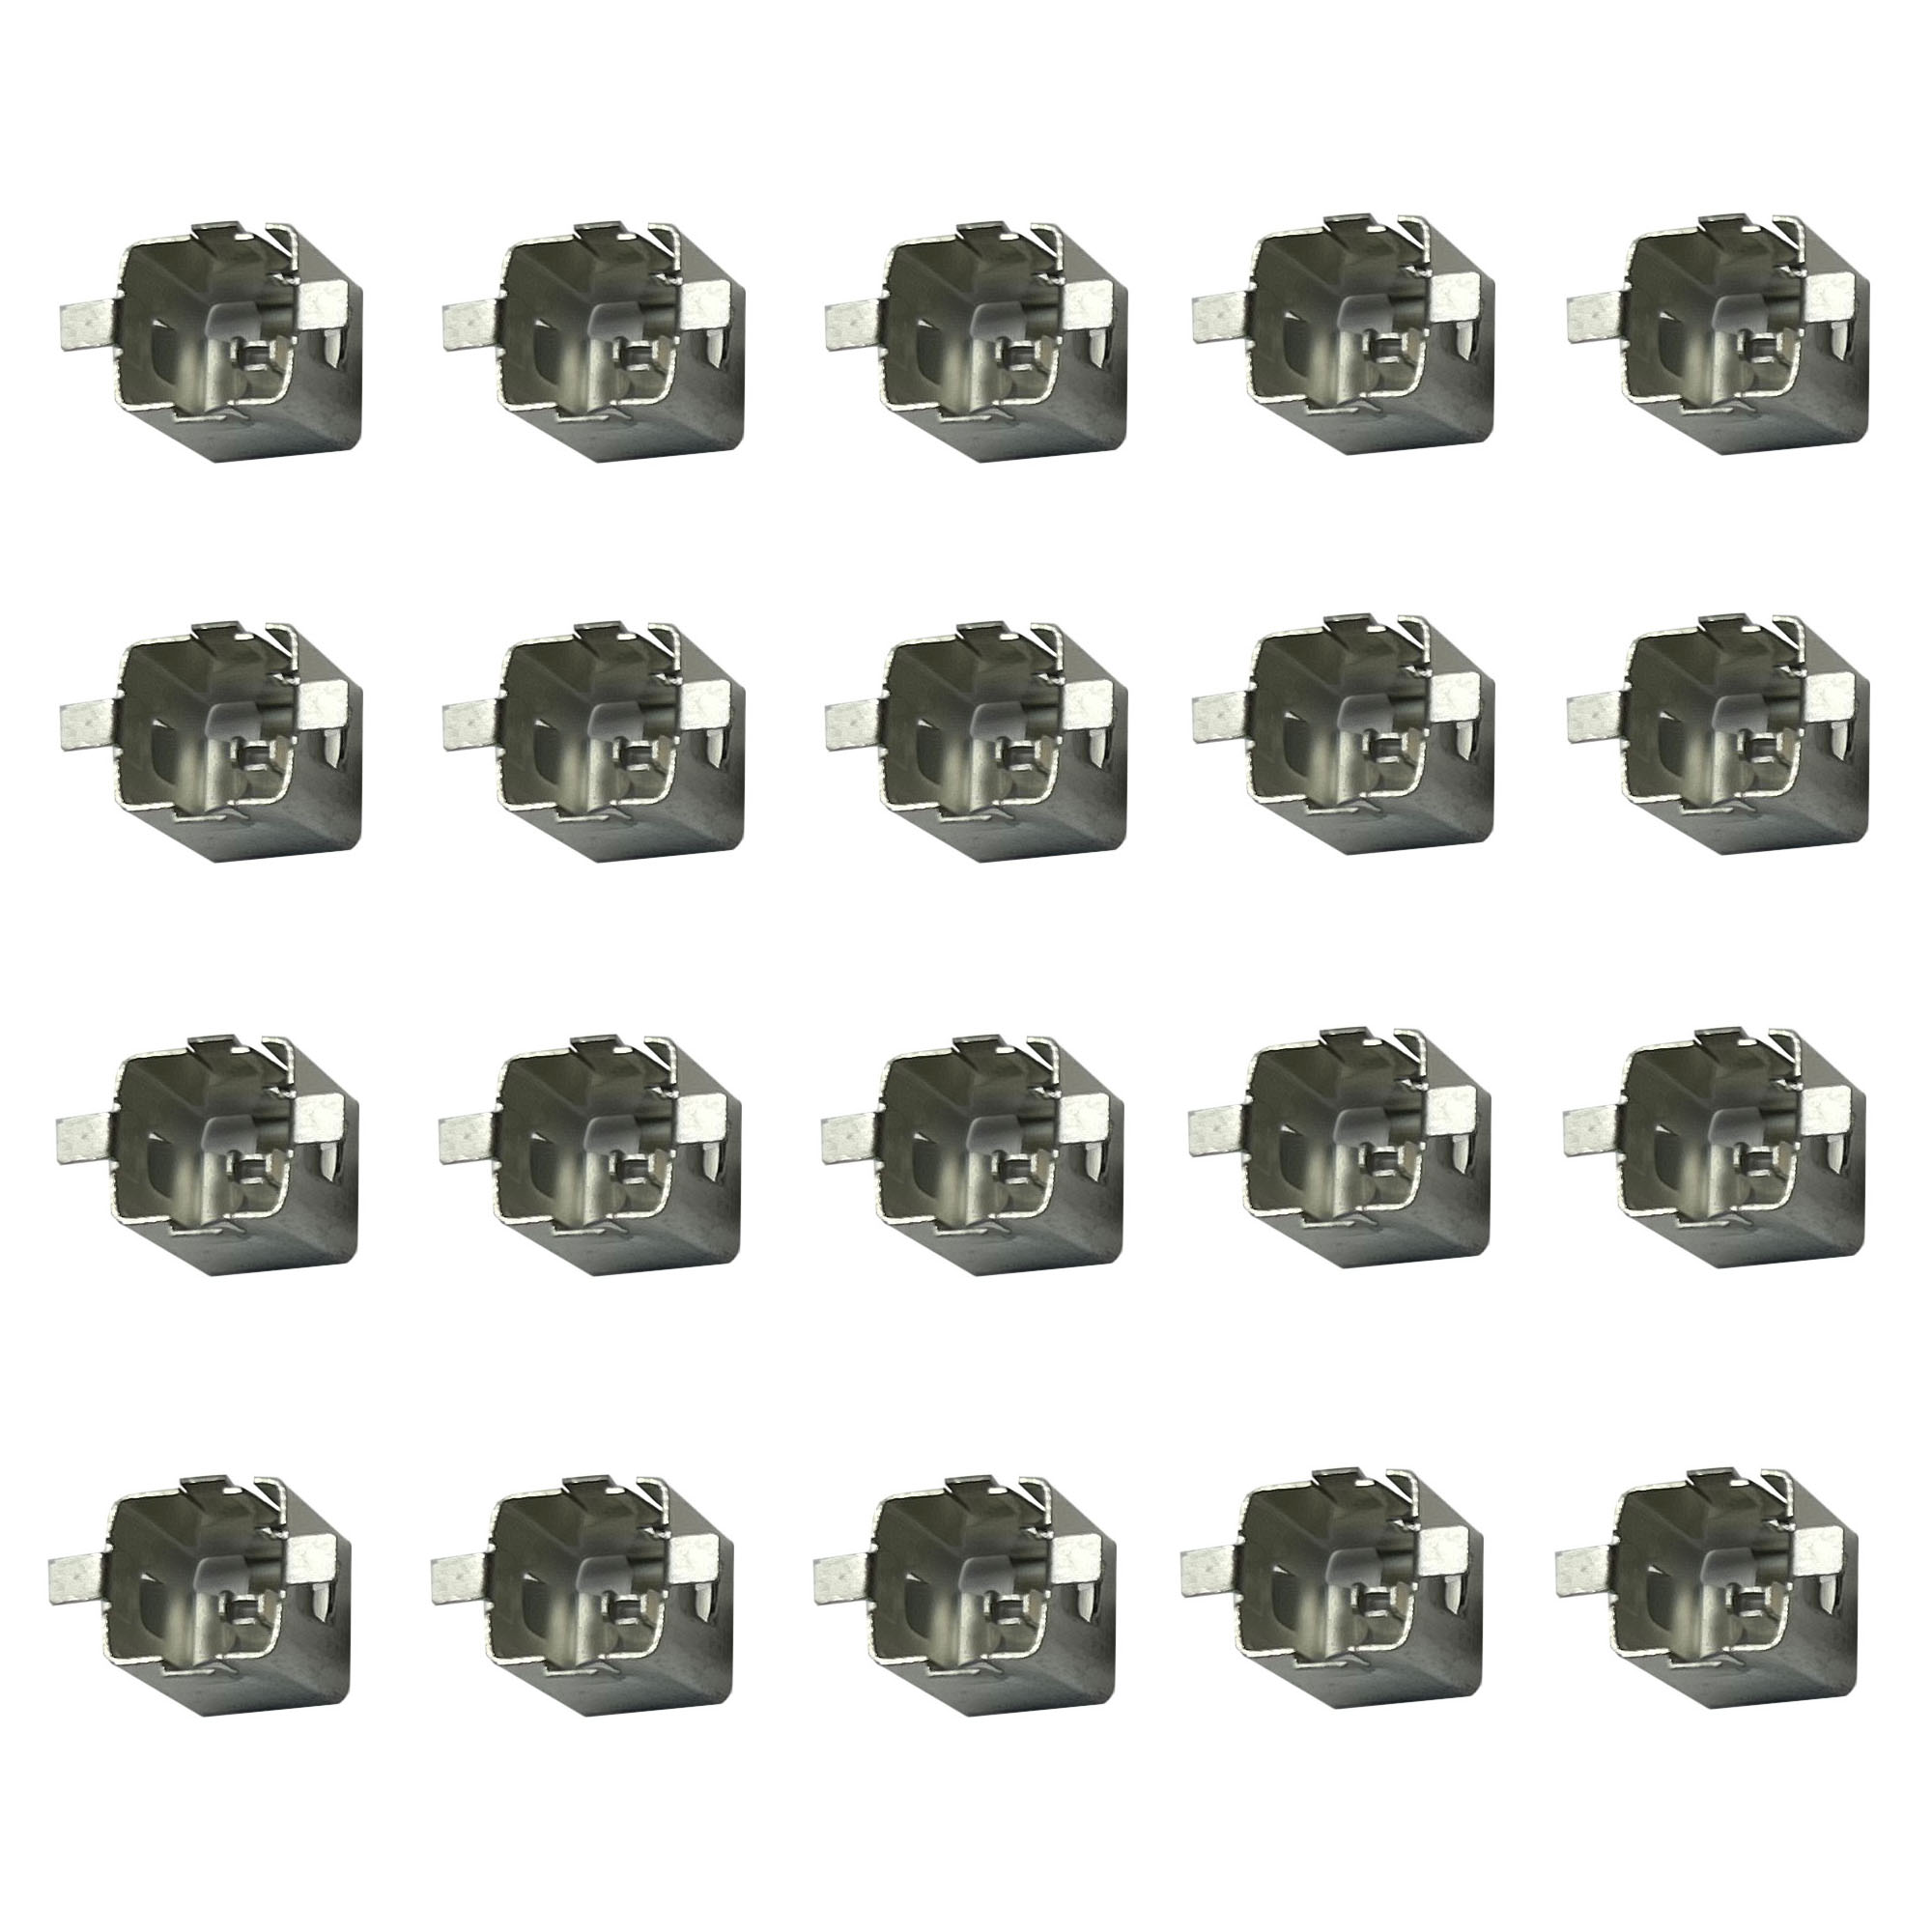 1972 Buick Skylark/GS/Regal/GN GAUGE CLUSTER PRINTED CIRCUIT BOARD RETAINER CLIPS; 20 PIECES IN ONE PACKAGE. | IN10224Z